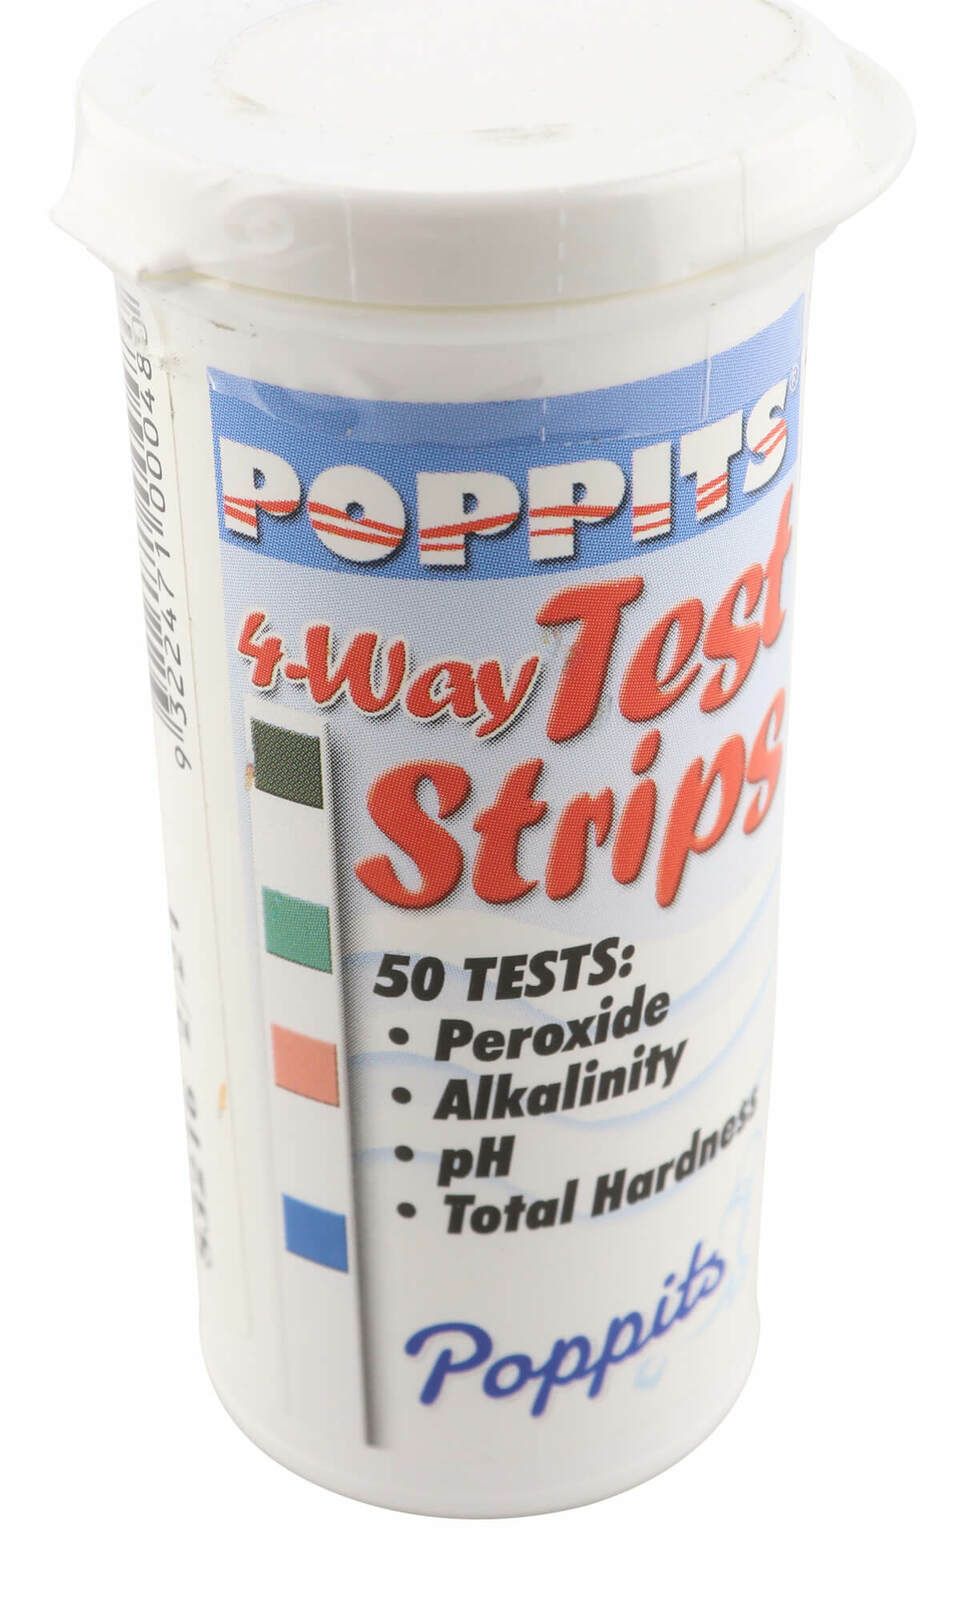 Spa Poppit Peroxsil 4 in 1 Pool & Spa Test Strips Peroxide PH Alkalinity TH Test